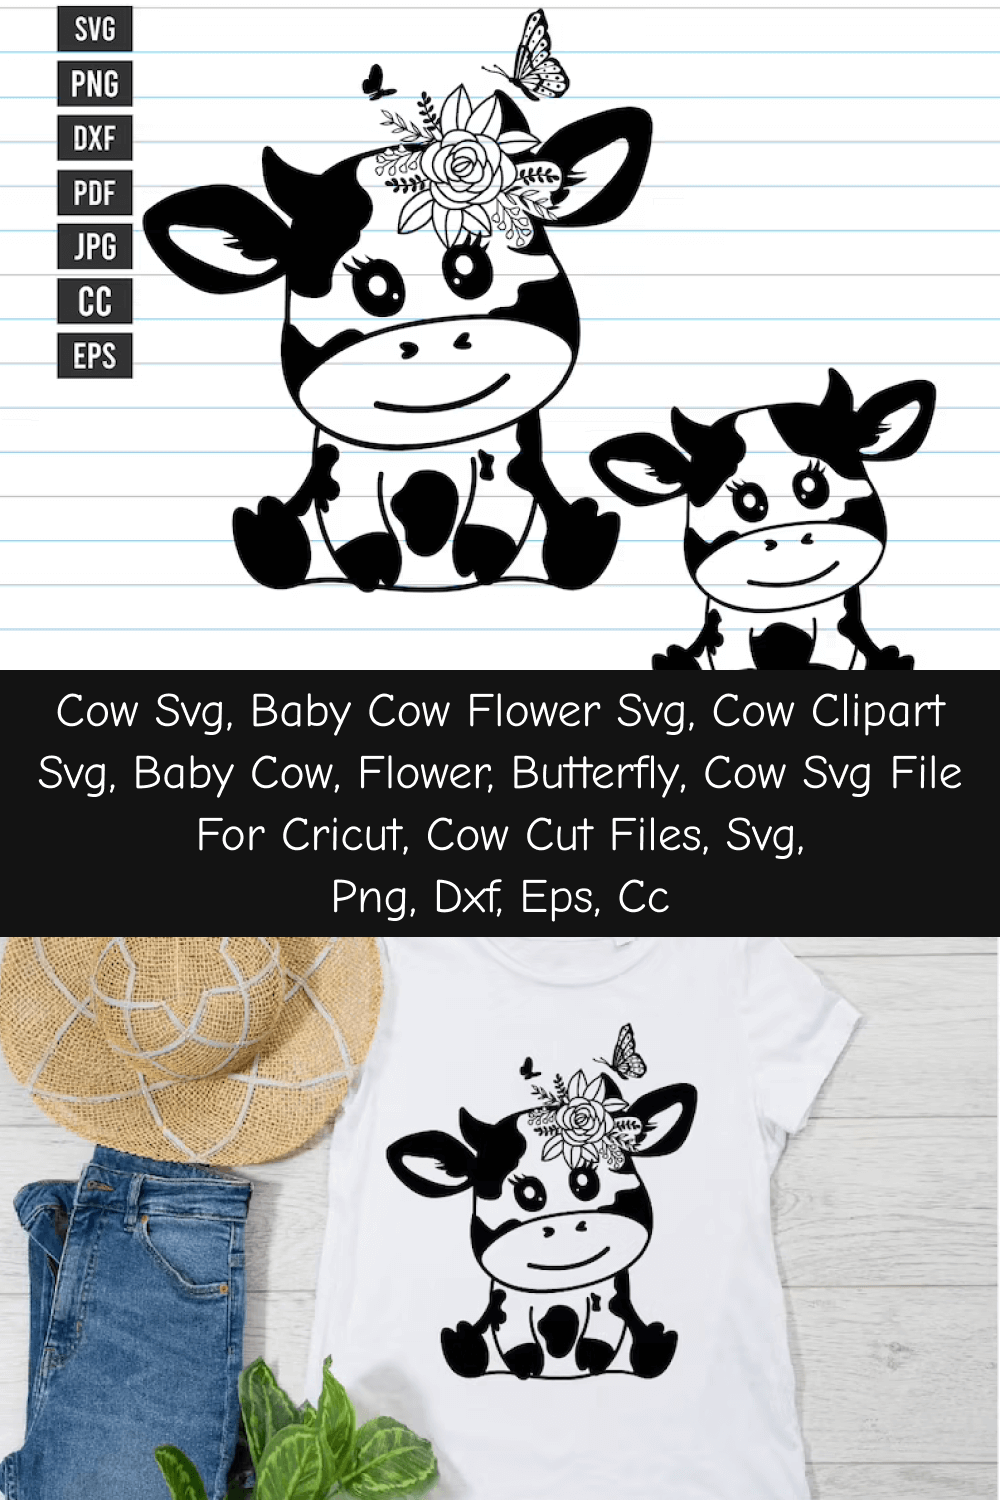 Clipart svg baby cow flower.